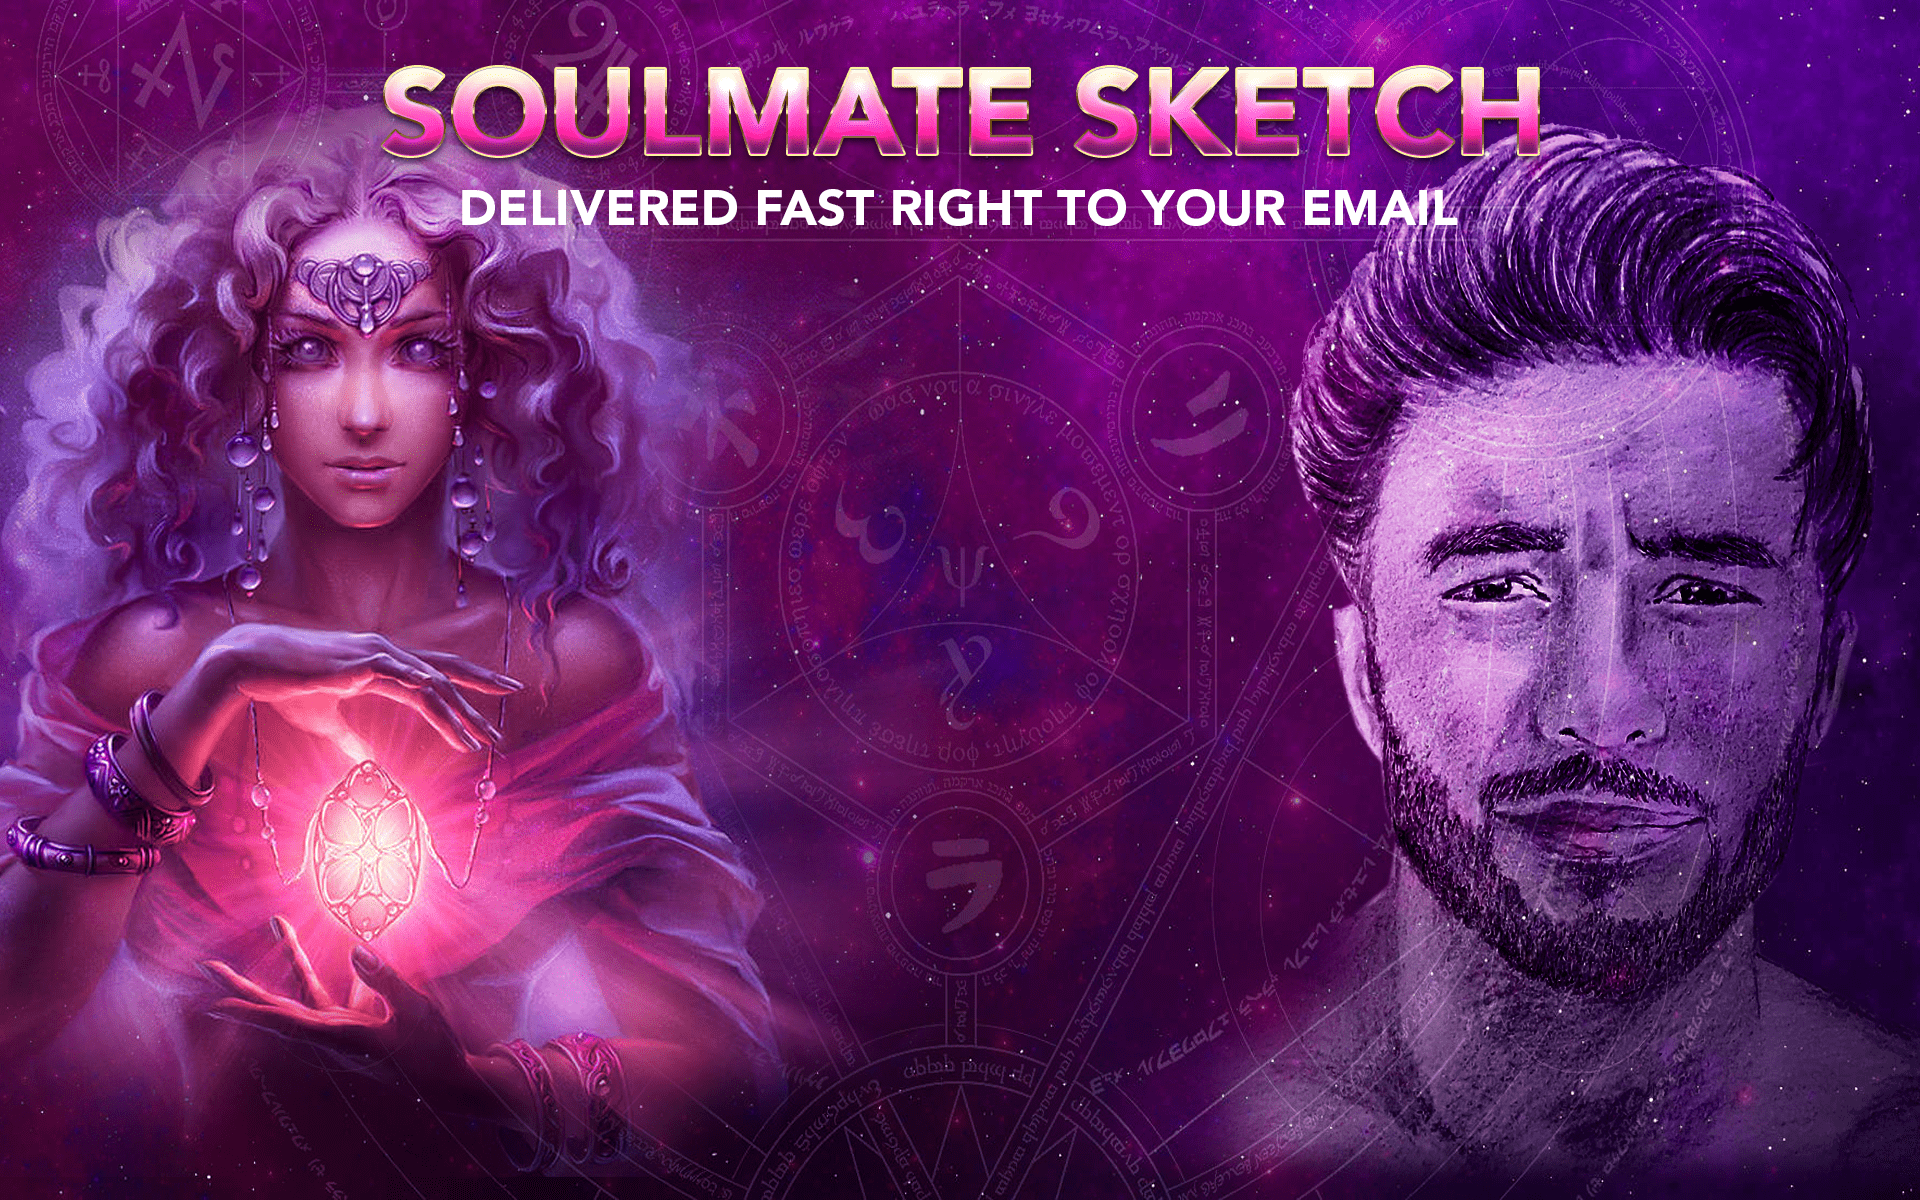 You are currently viewing SoulMate Sketch Reviews – Are They Real or Just Wishful Thinking?